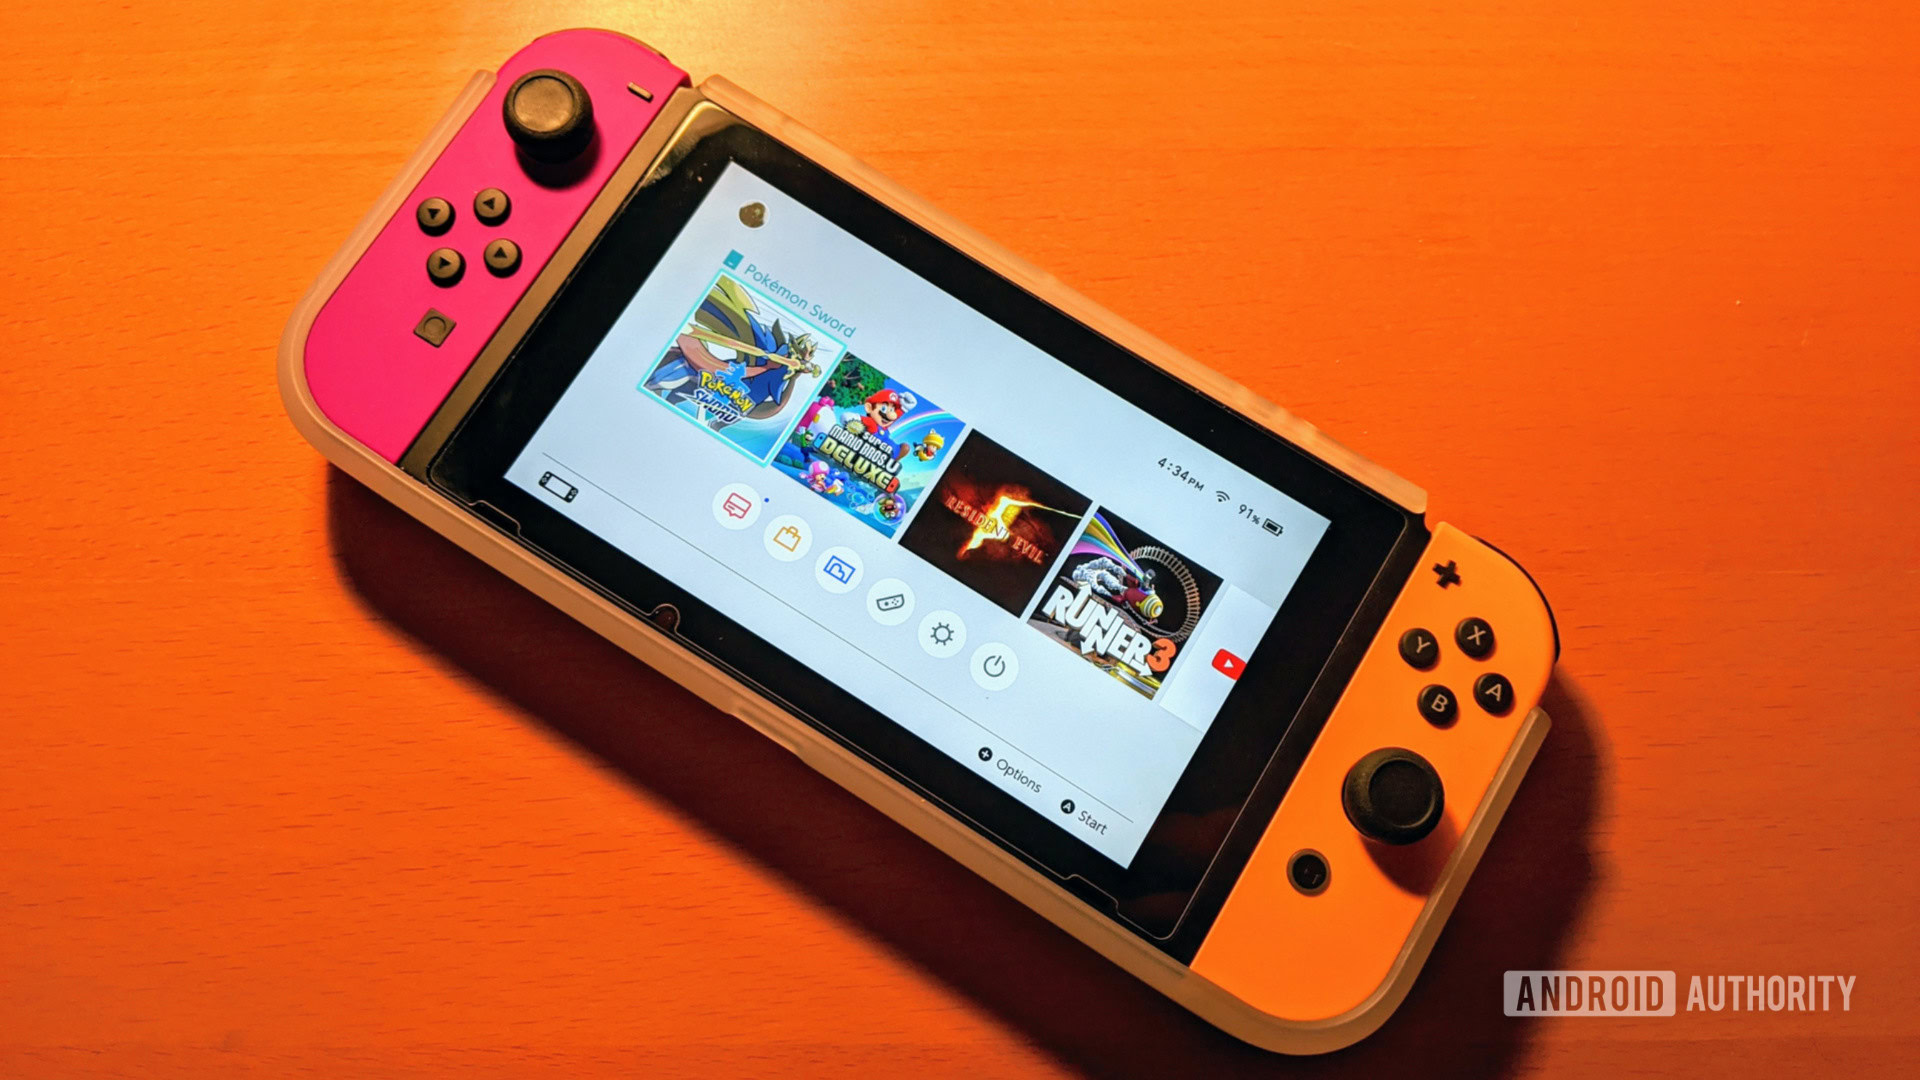 Nintendo Switch Review: After 6 Years, the Switch Is Still Worth